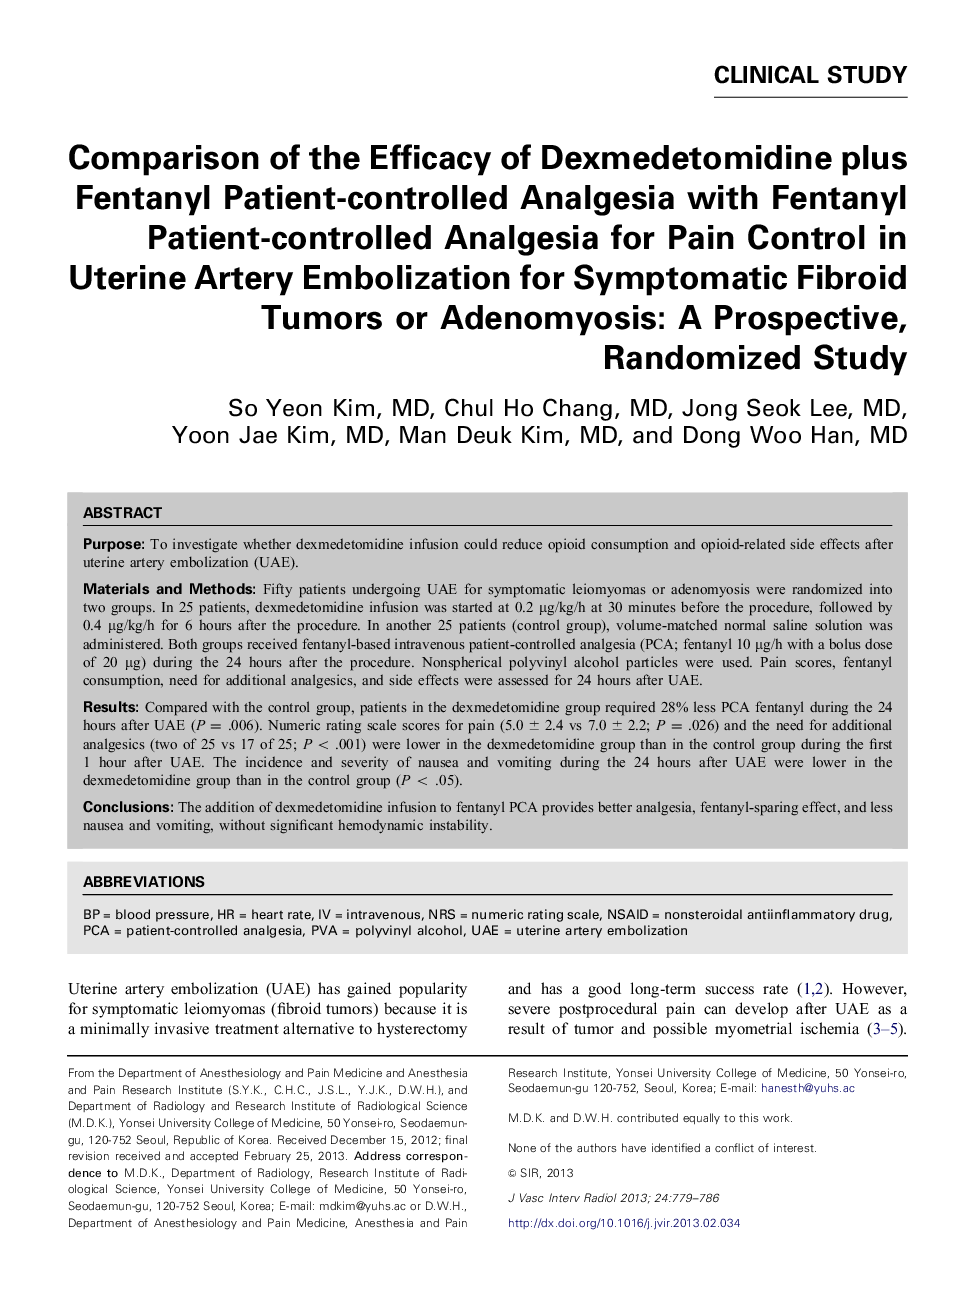 Comparison of the Efficacy of Dexmedetomidine plus Fentanyl Patient-controlled Analgesia with Fentanyl Patient-controlled Analgesia for Pain Control in Uterine Artery Embolization for Symptomatic Fibroid Tumors or Adenomyosis: A Prospective, Randomized St